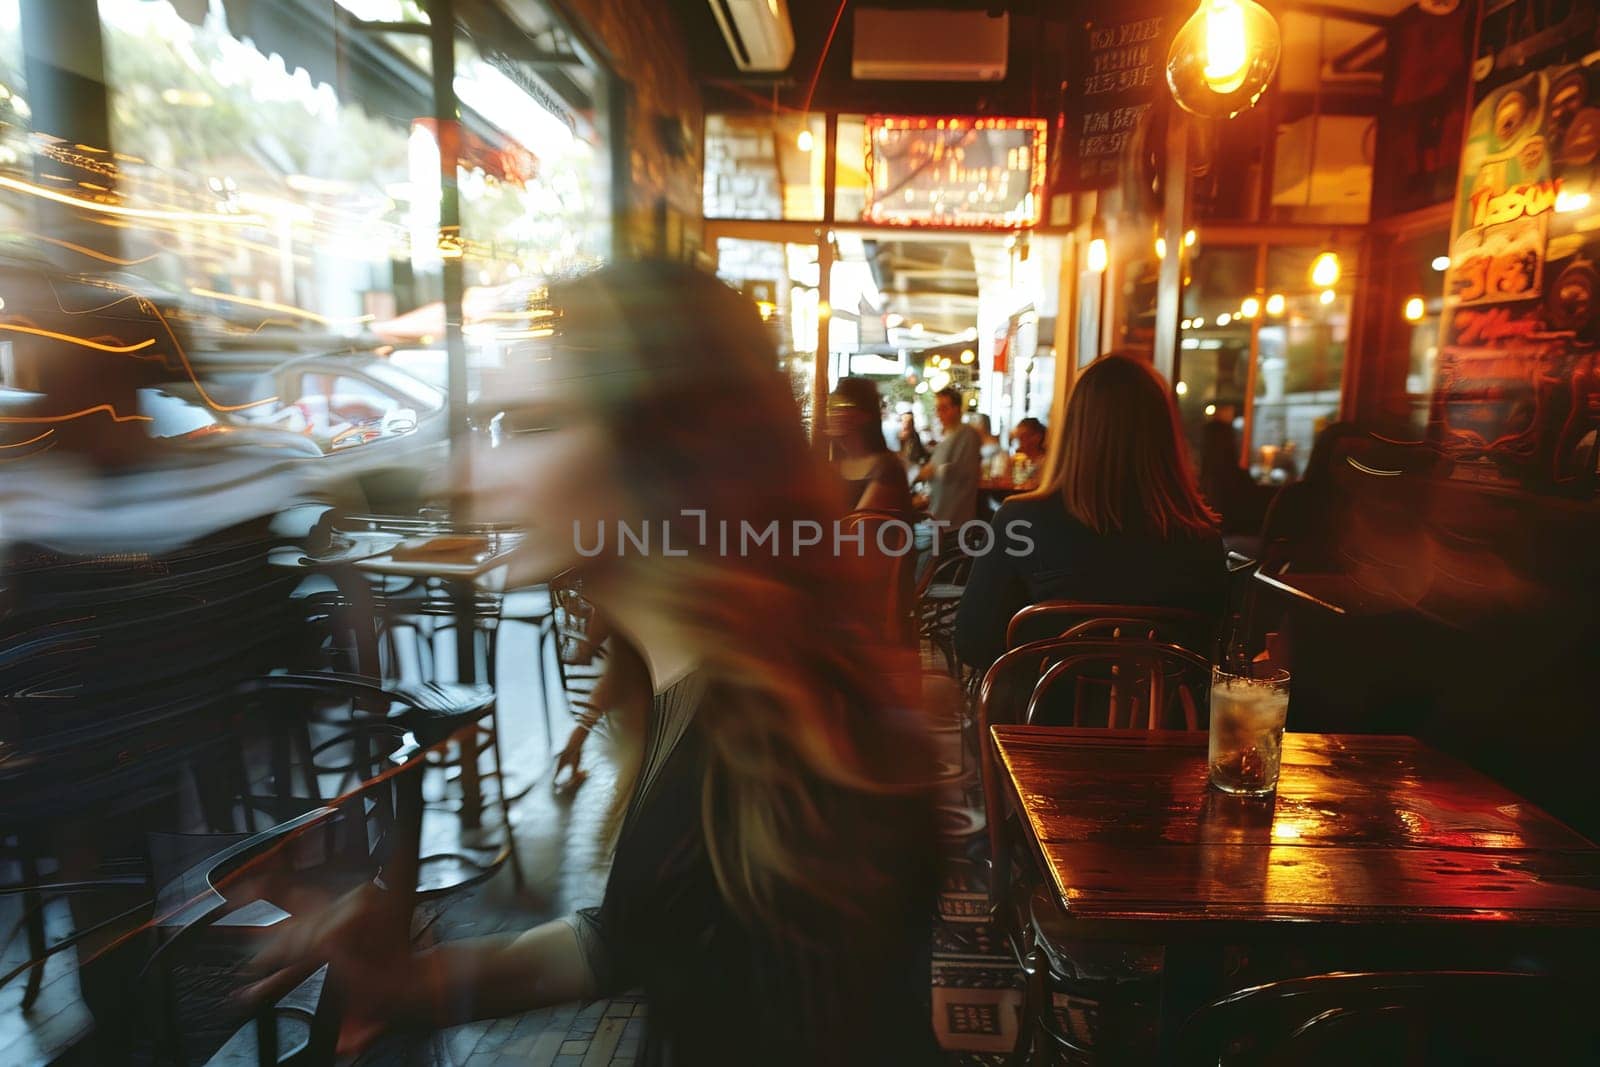 A blurry image of a busy city street with people walking and sitting at tables outside of restaurants. Scene is lively and bustling, with the blurred effect giving a sense of motion and energy